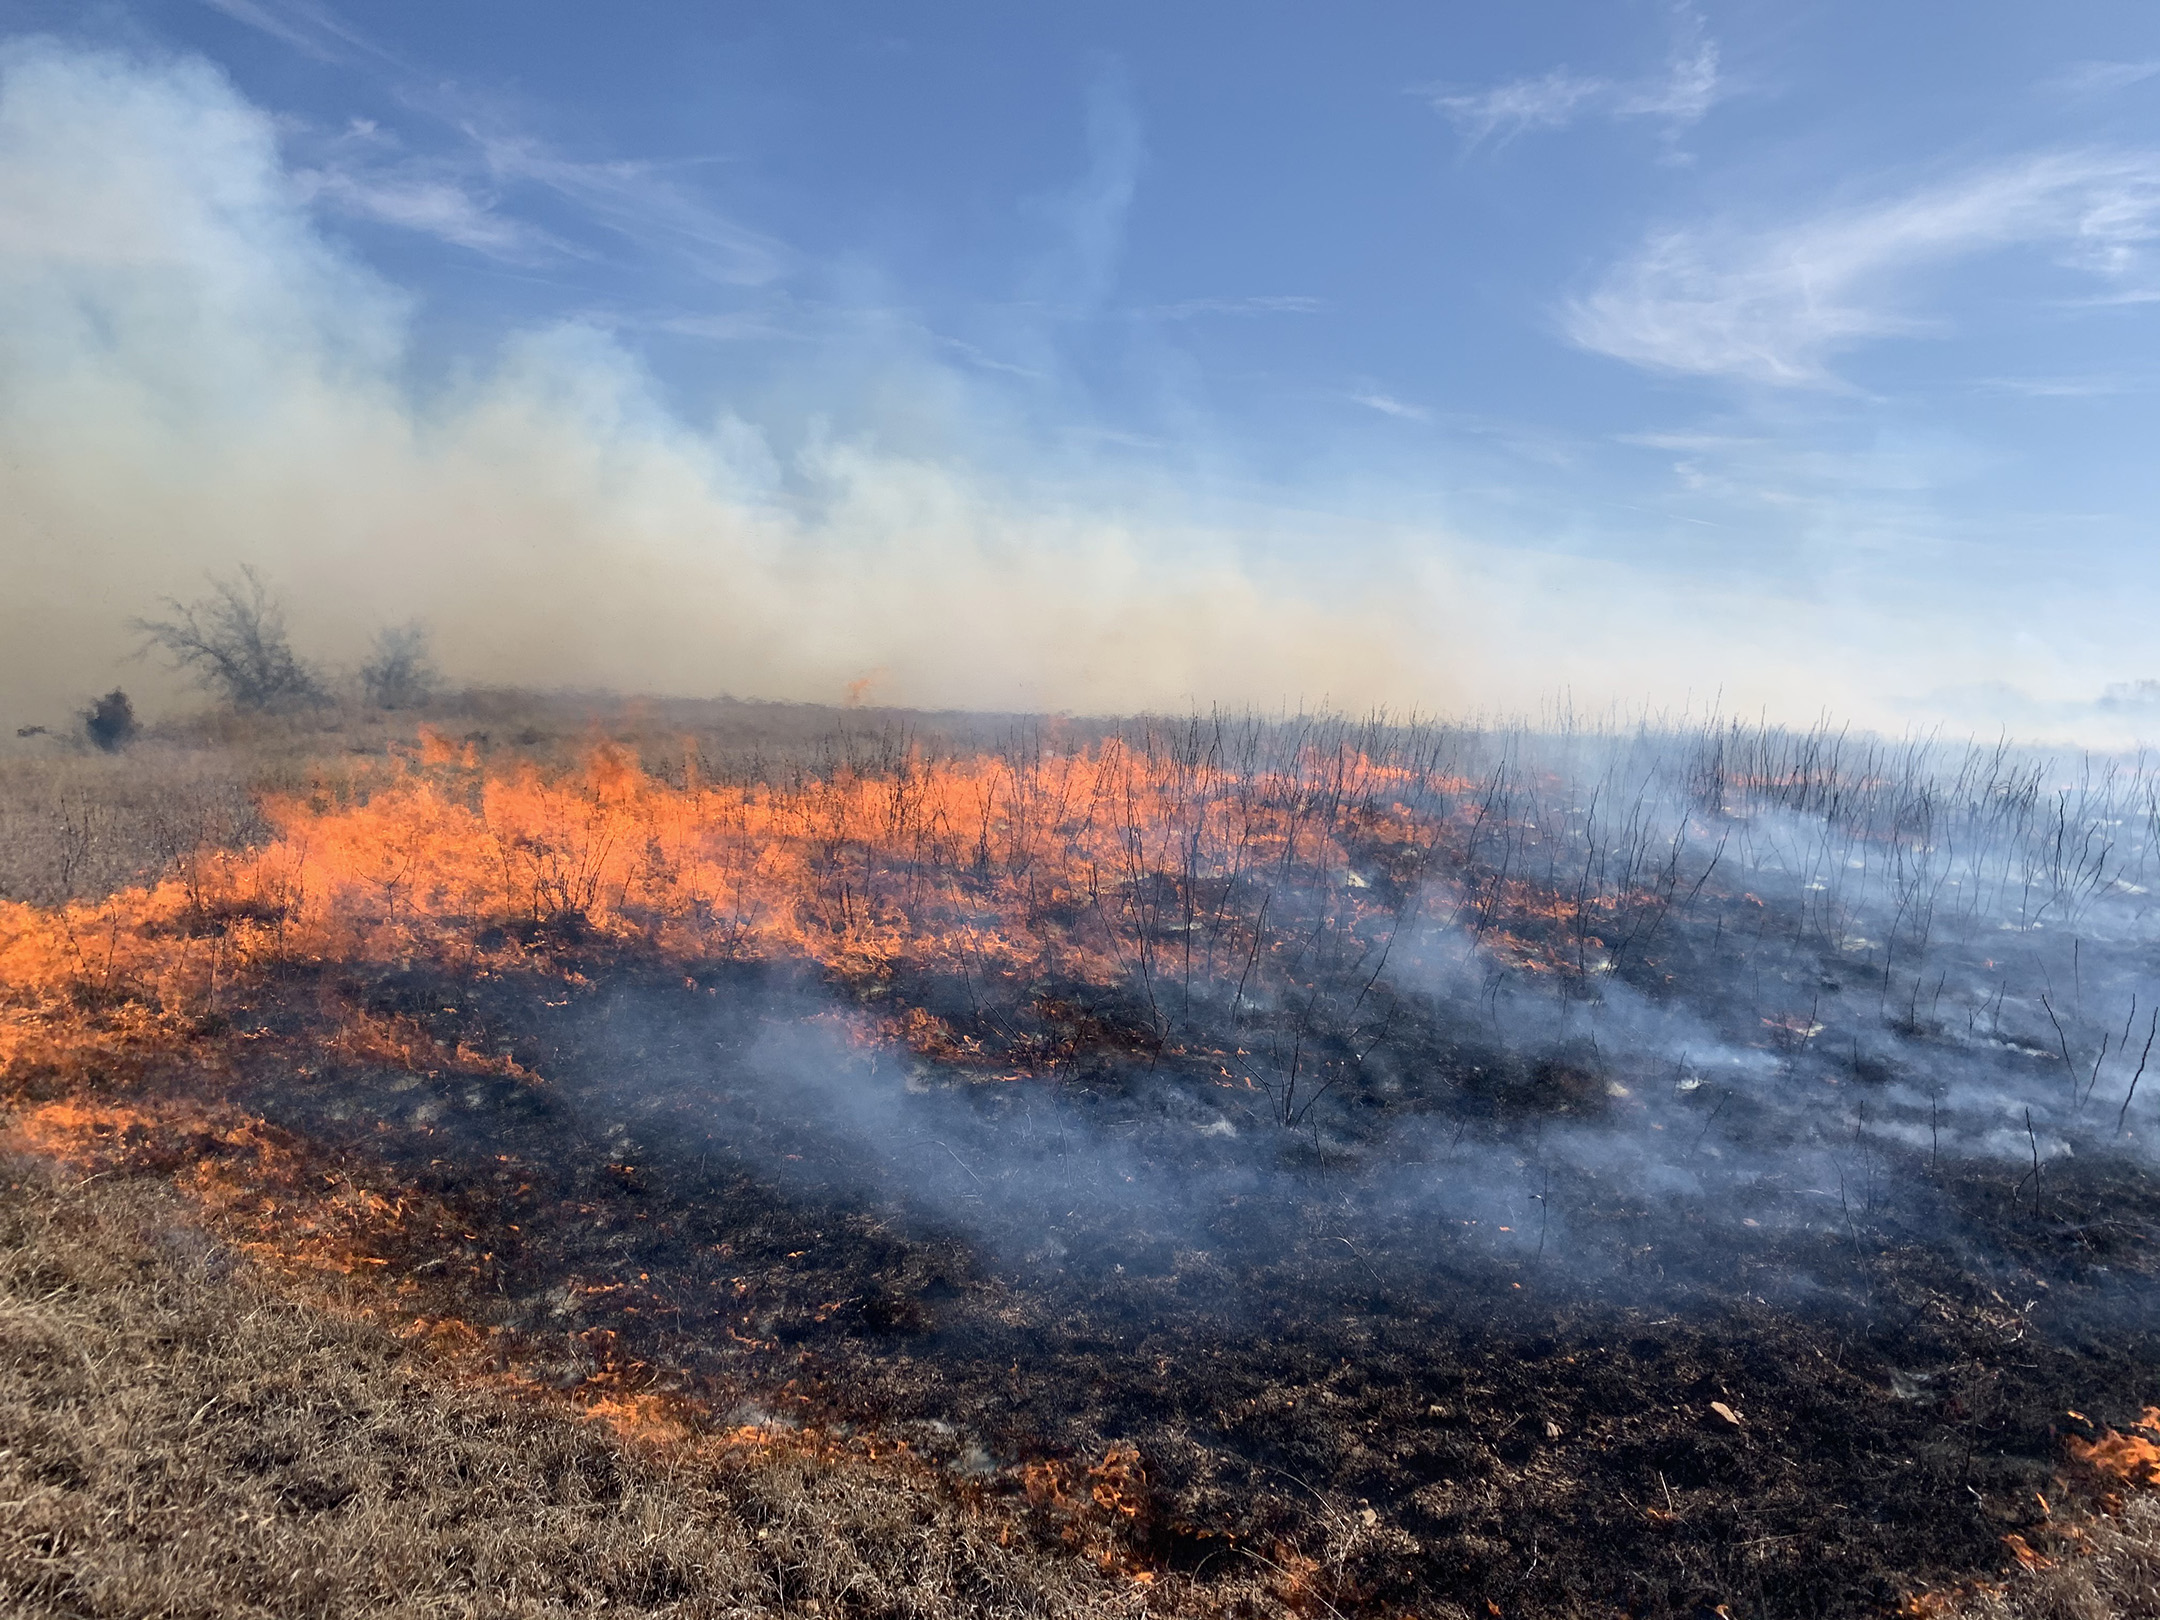 The short brown grass of this rangeland has been set on fire. A band of orange flames advances under brown smoke, leaving burned and blackened ground behind.